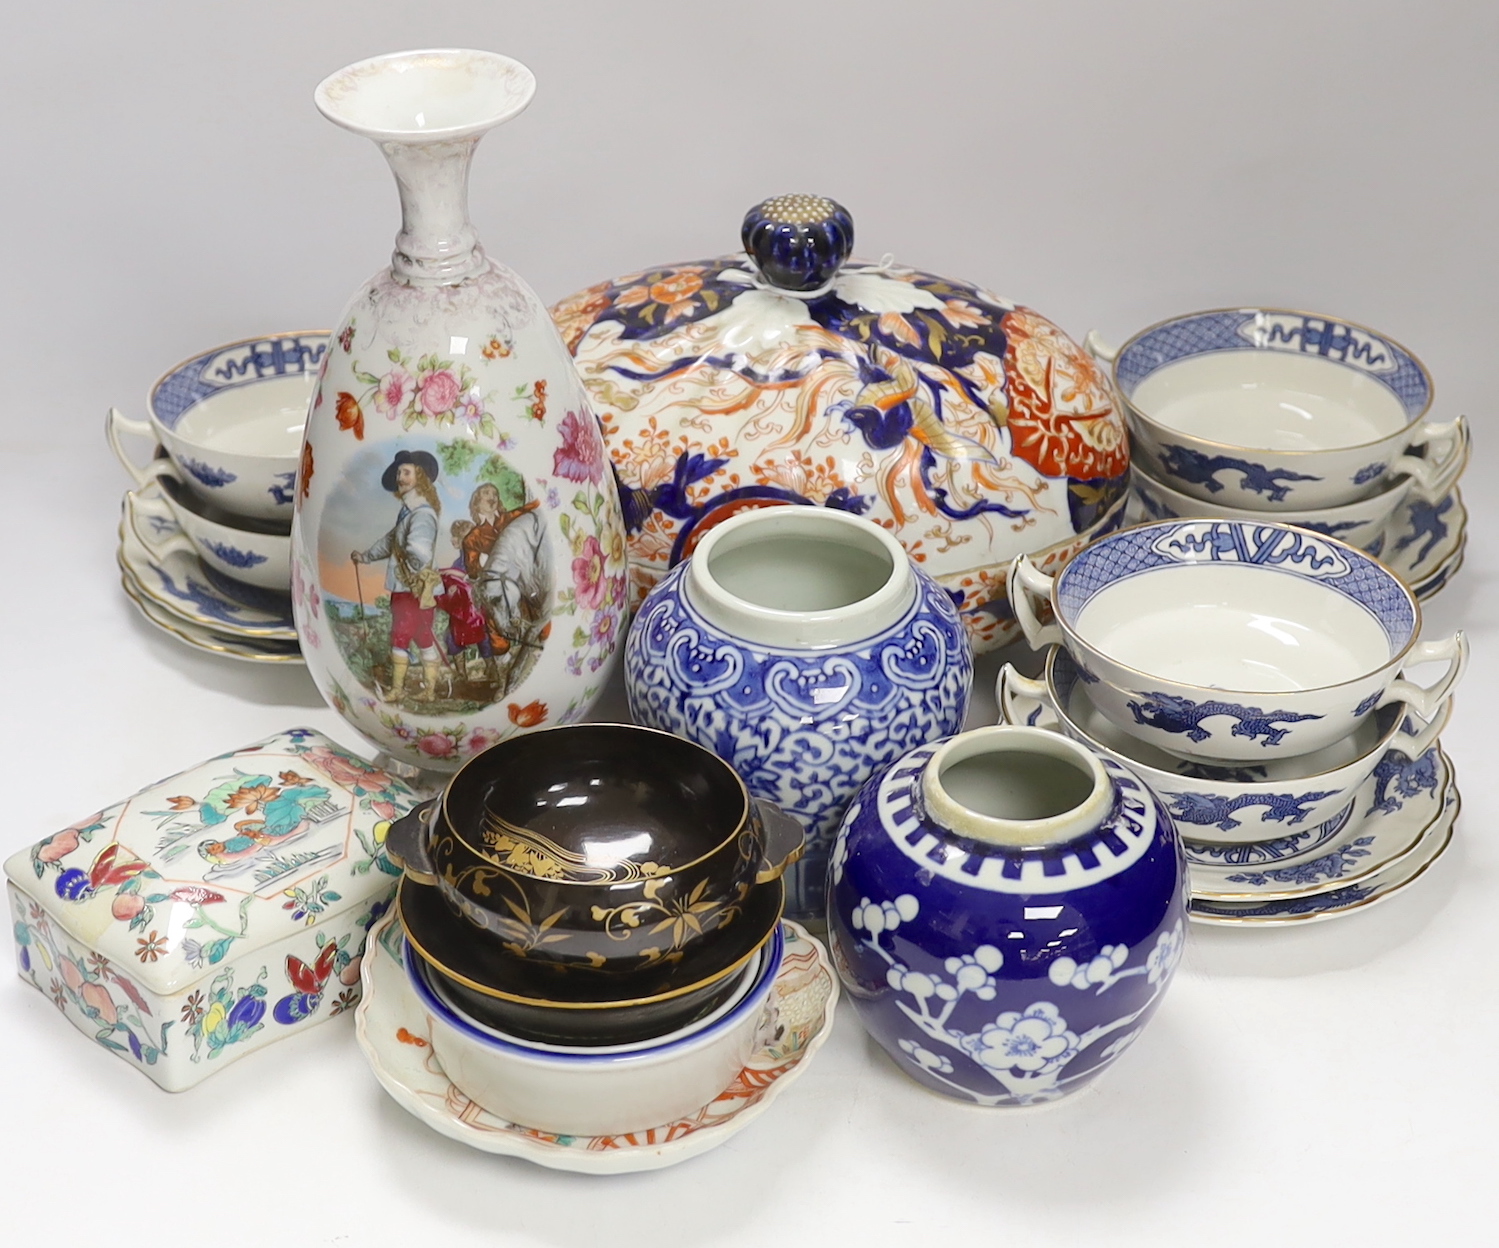 A 19th century Japanese Imari box and cover together with other Japanese, Chinese and European